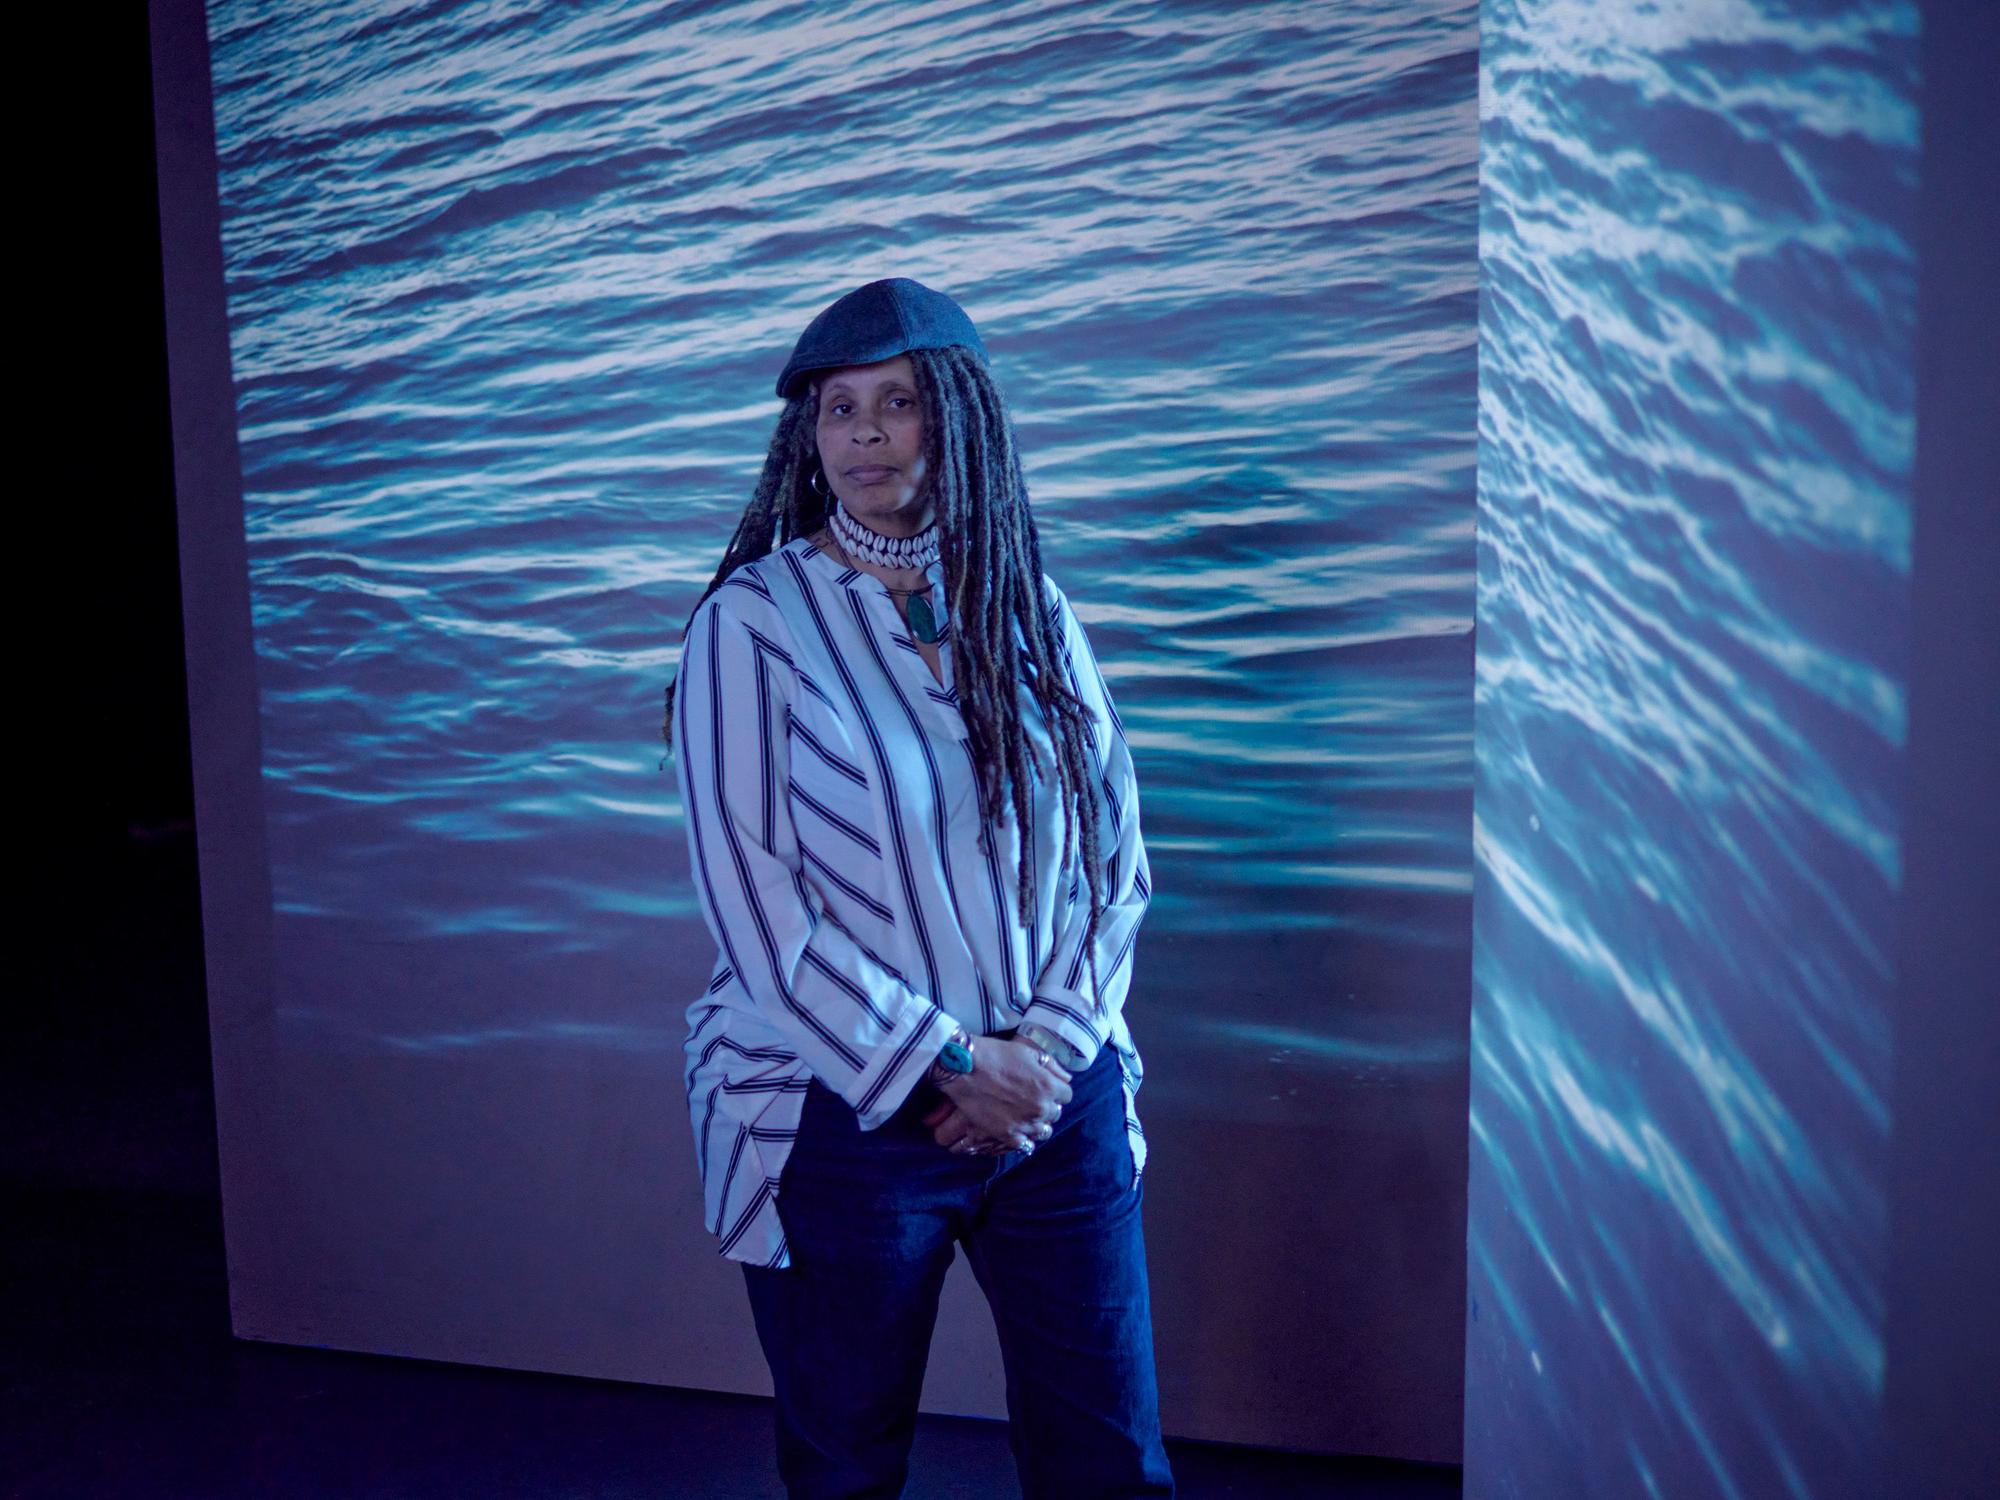 Portrait of Keith in a striped shirt, hat and dreadlocks with a photo of the ocean projected in the background